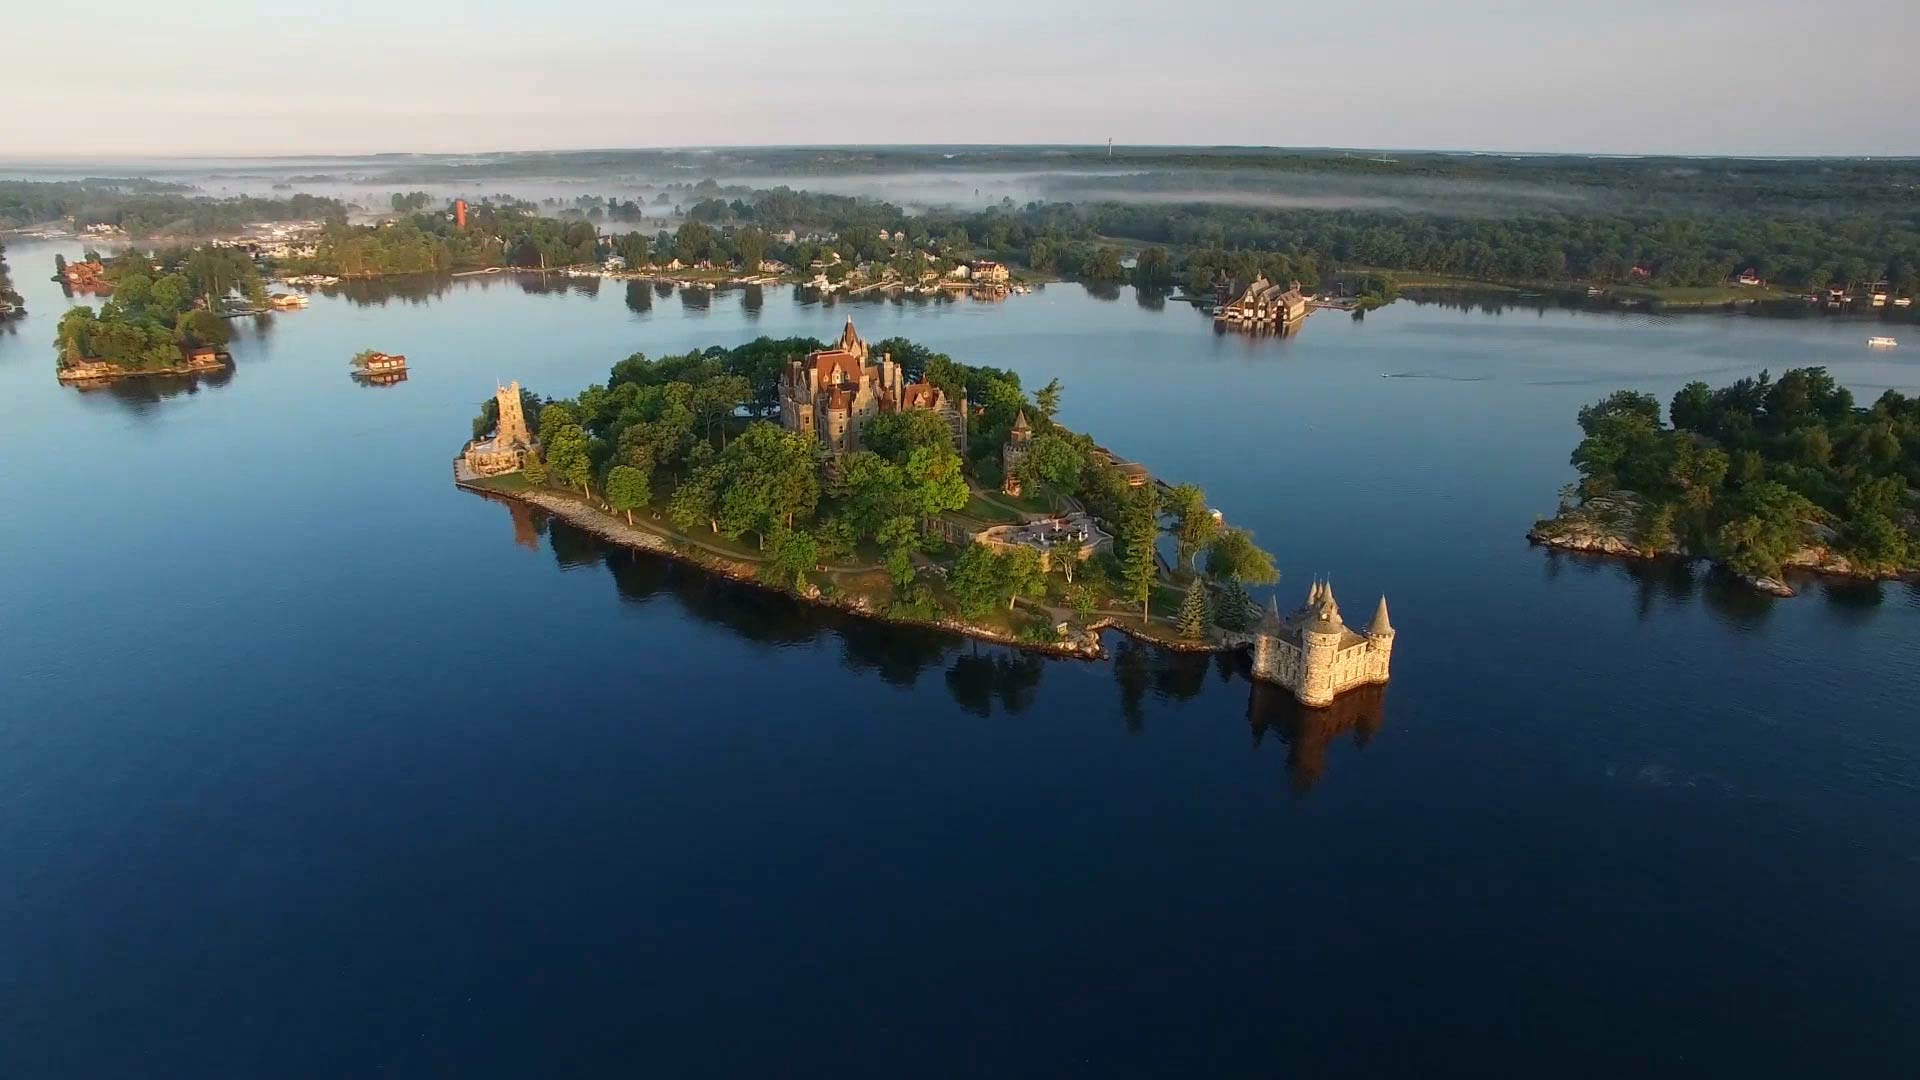 Gananoque Ontario island in the St. Lawrence River